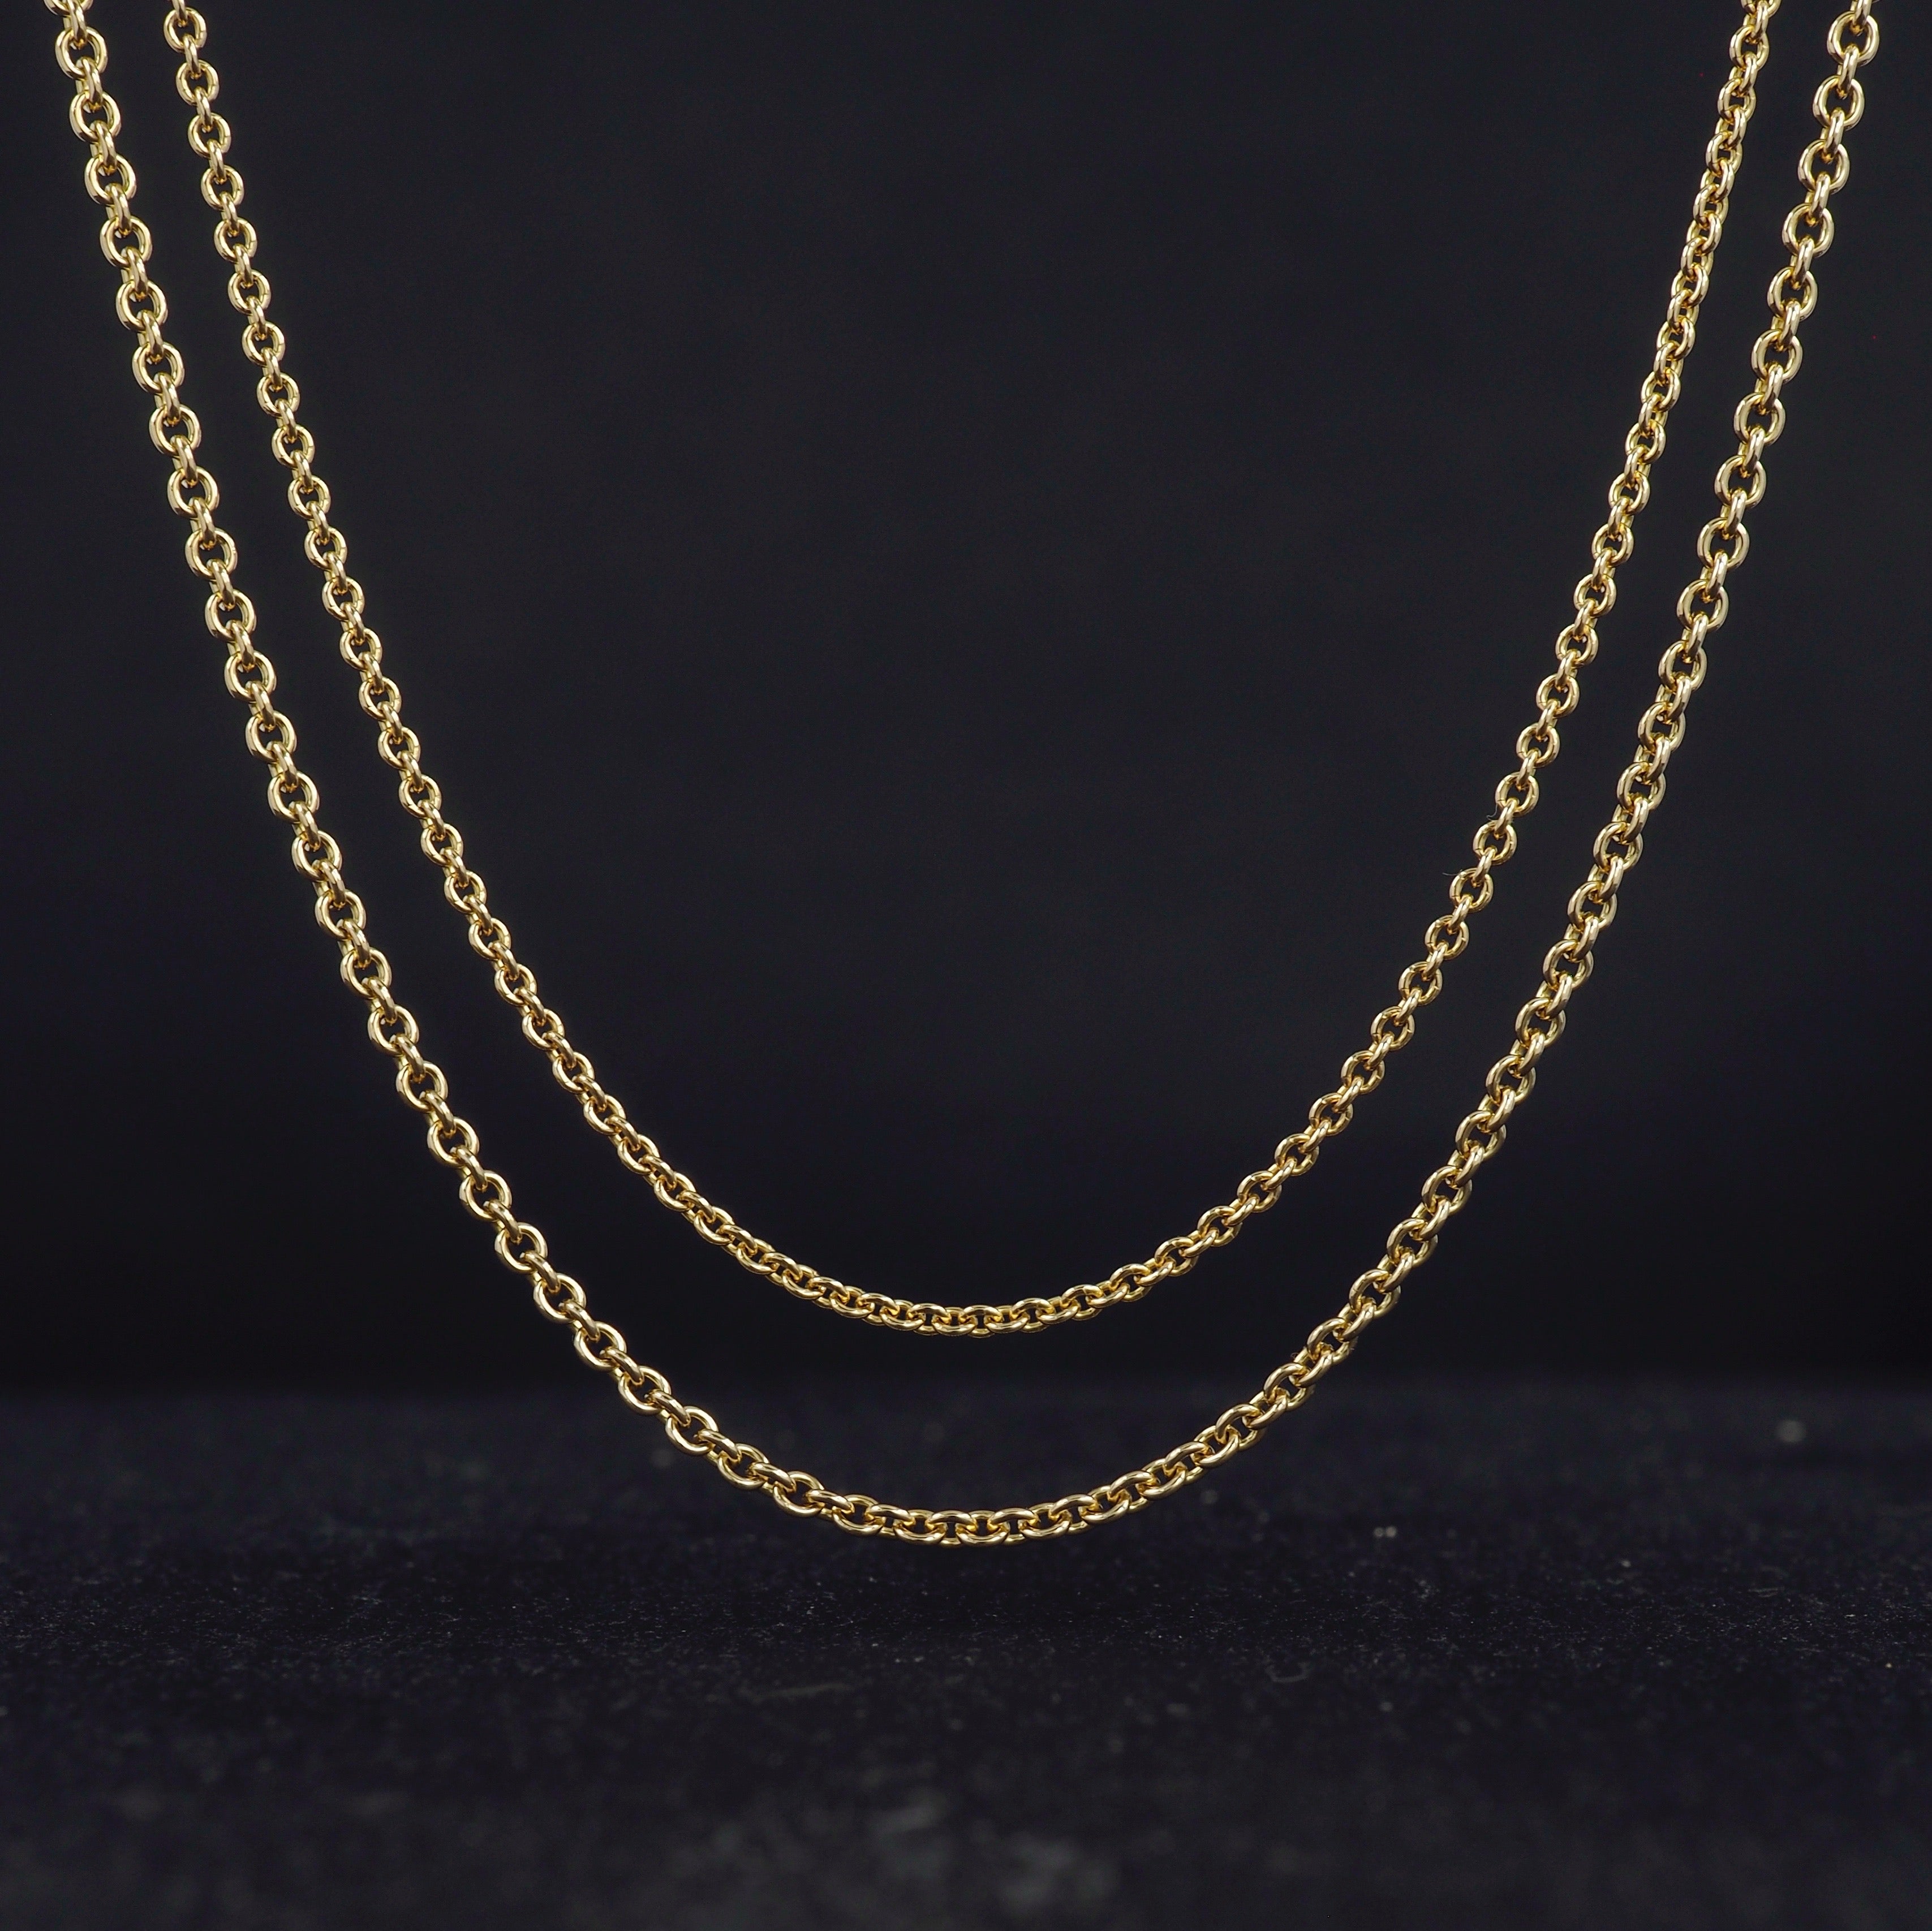 1.3mm gold cable chain